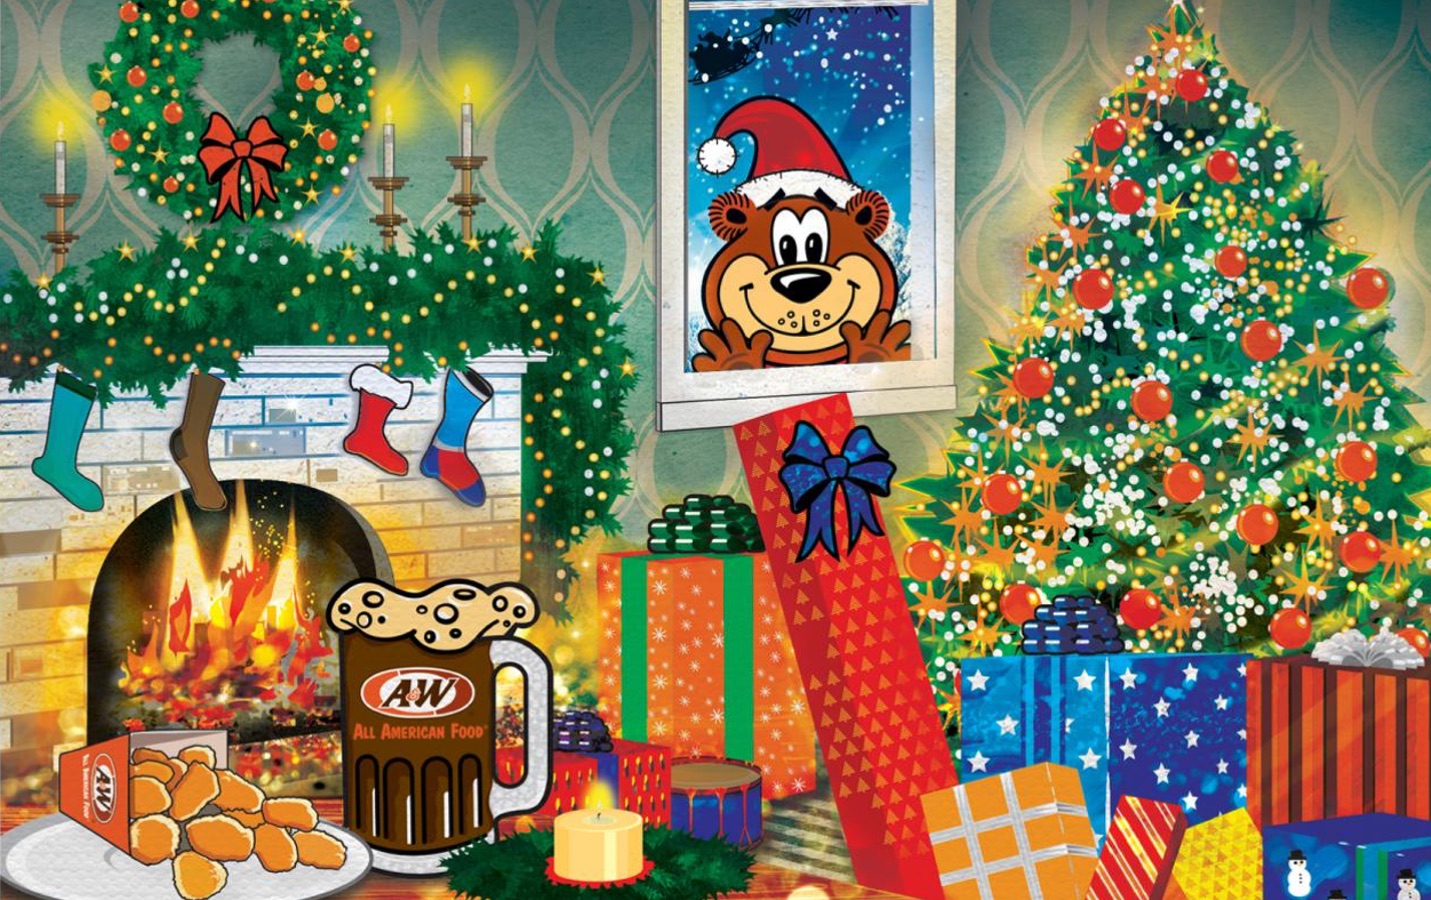 Rooty the Great Root Bear wearing a Santa hat, looking in house with Christmas tree, fireplace, presents, Root Beer, and Cheese Curds